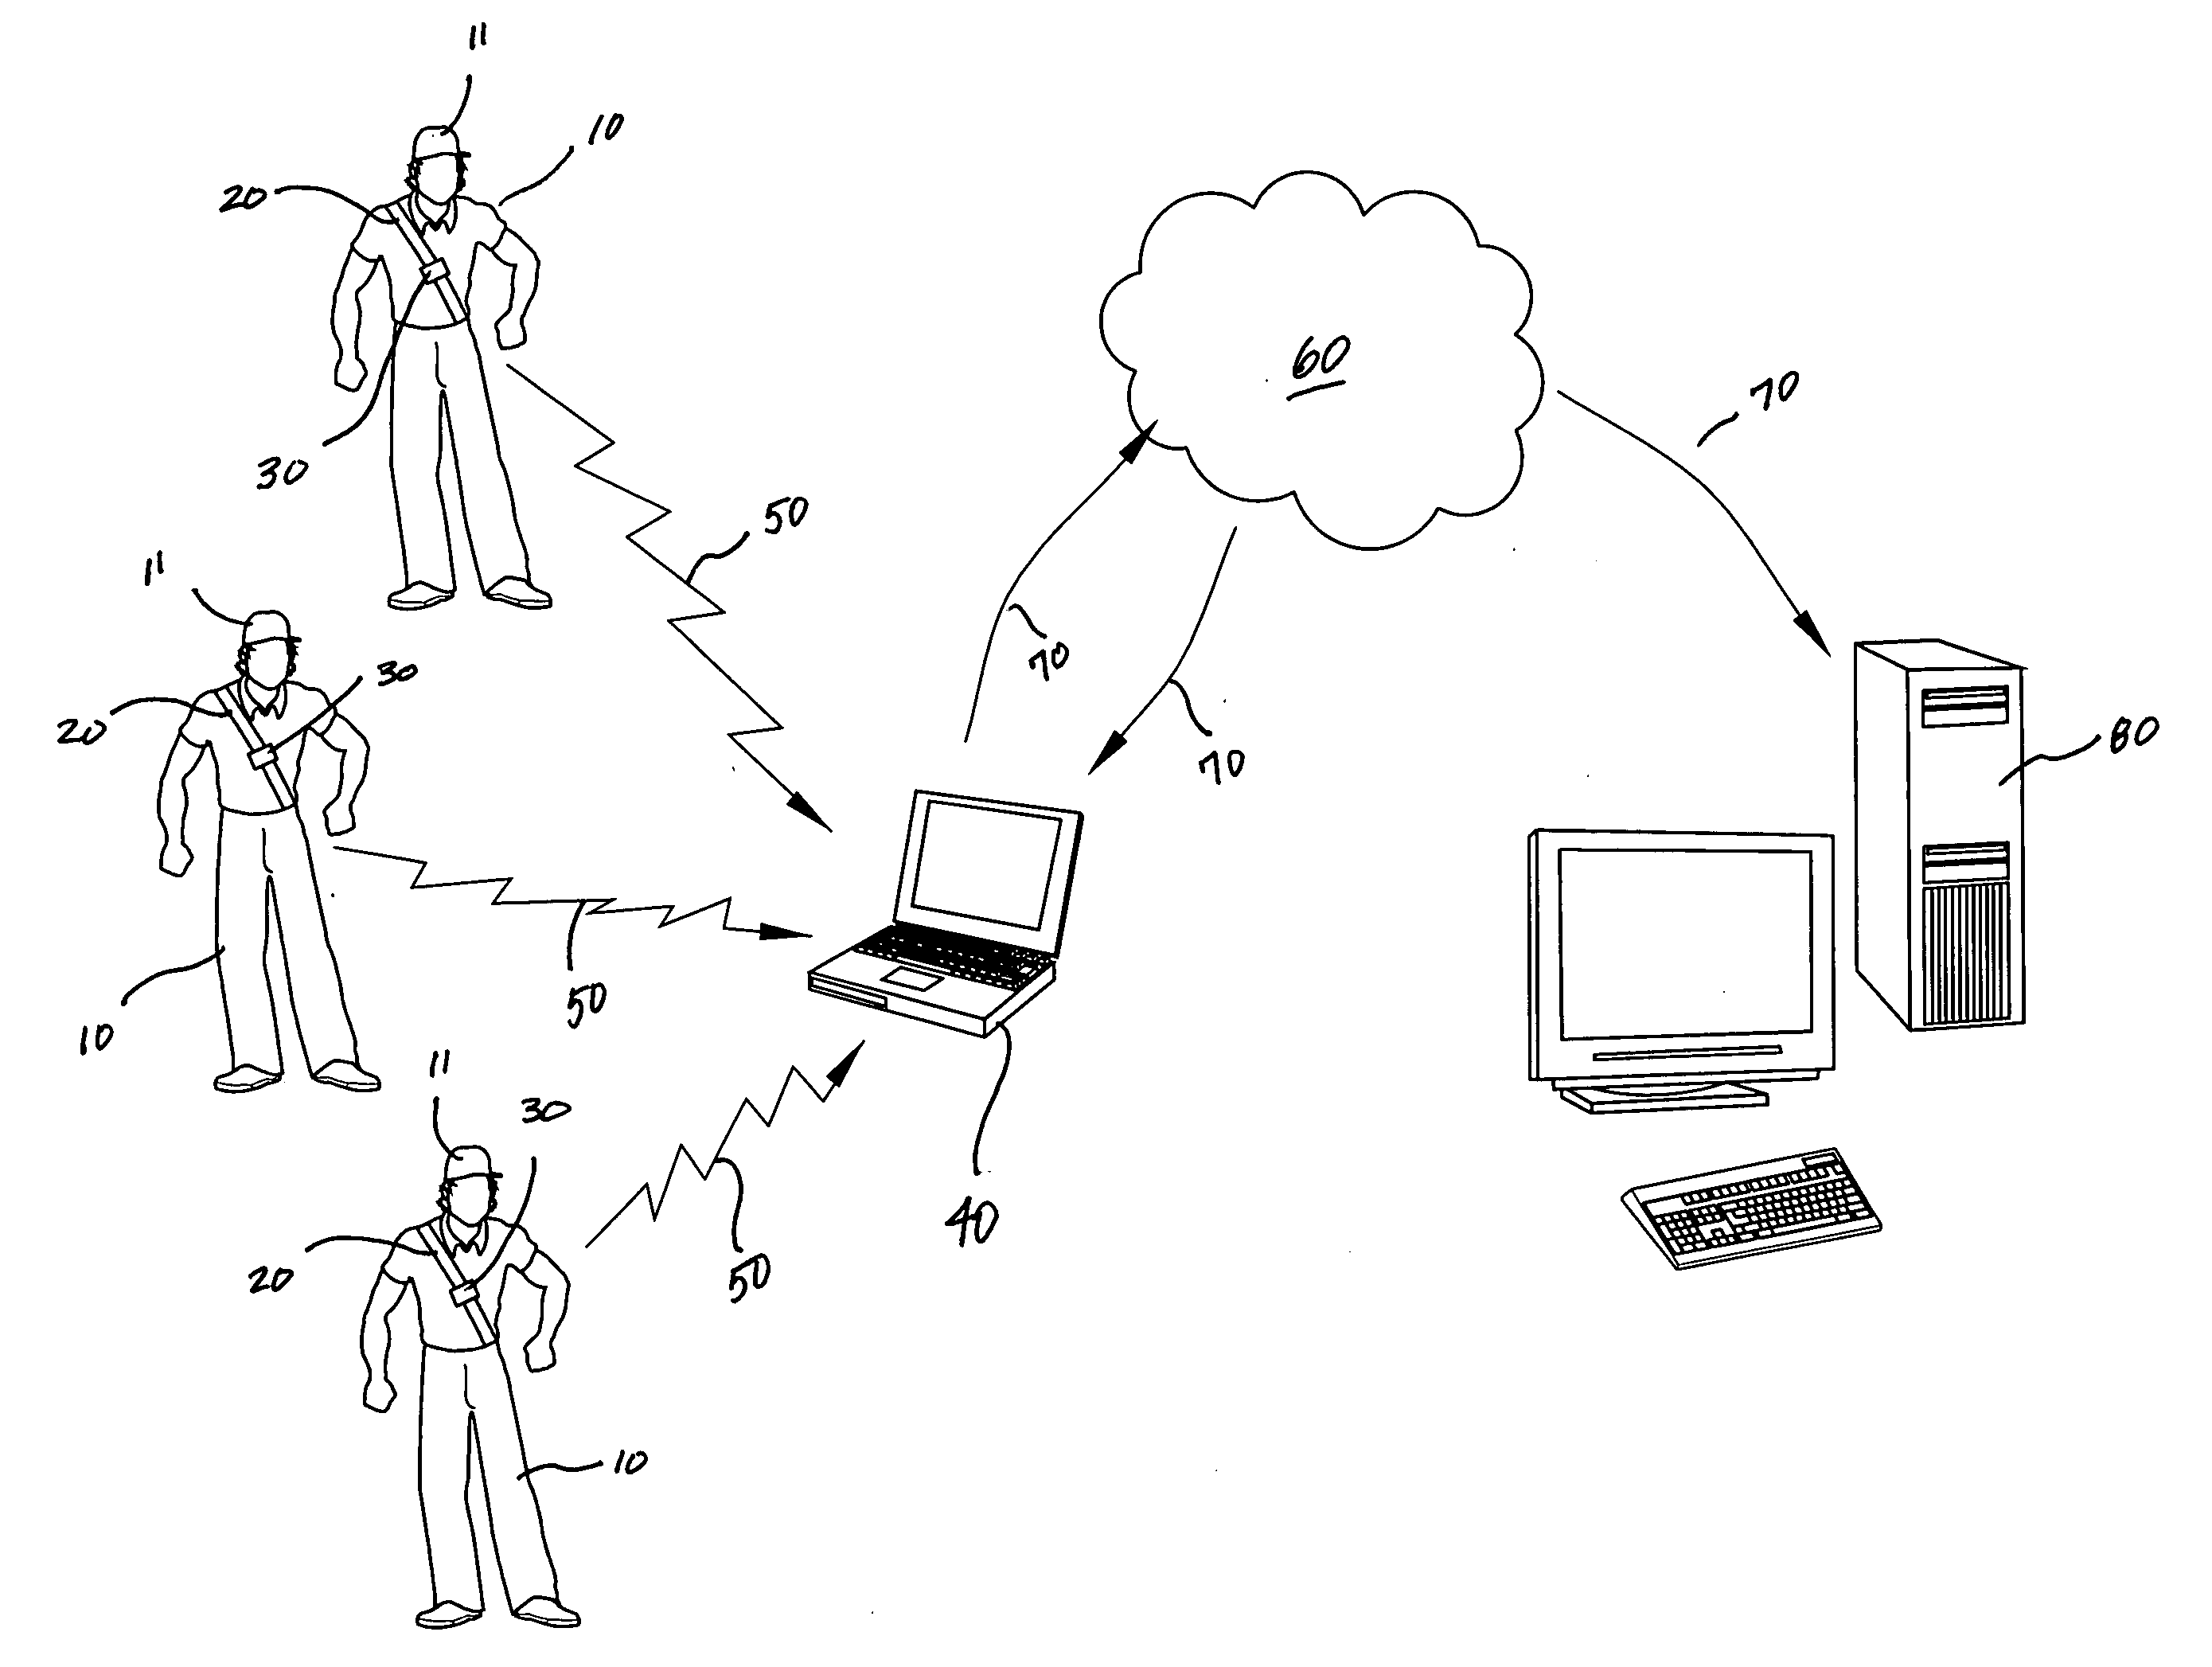 Method and apparatus for improving personnel safety and performance using logged and real-time vital sign monitoring